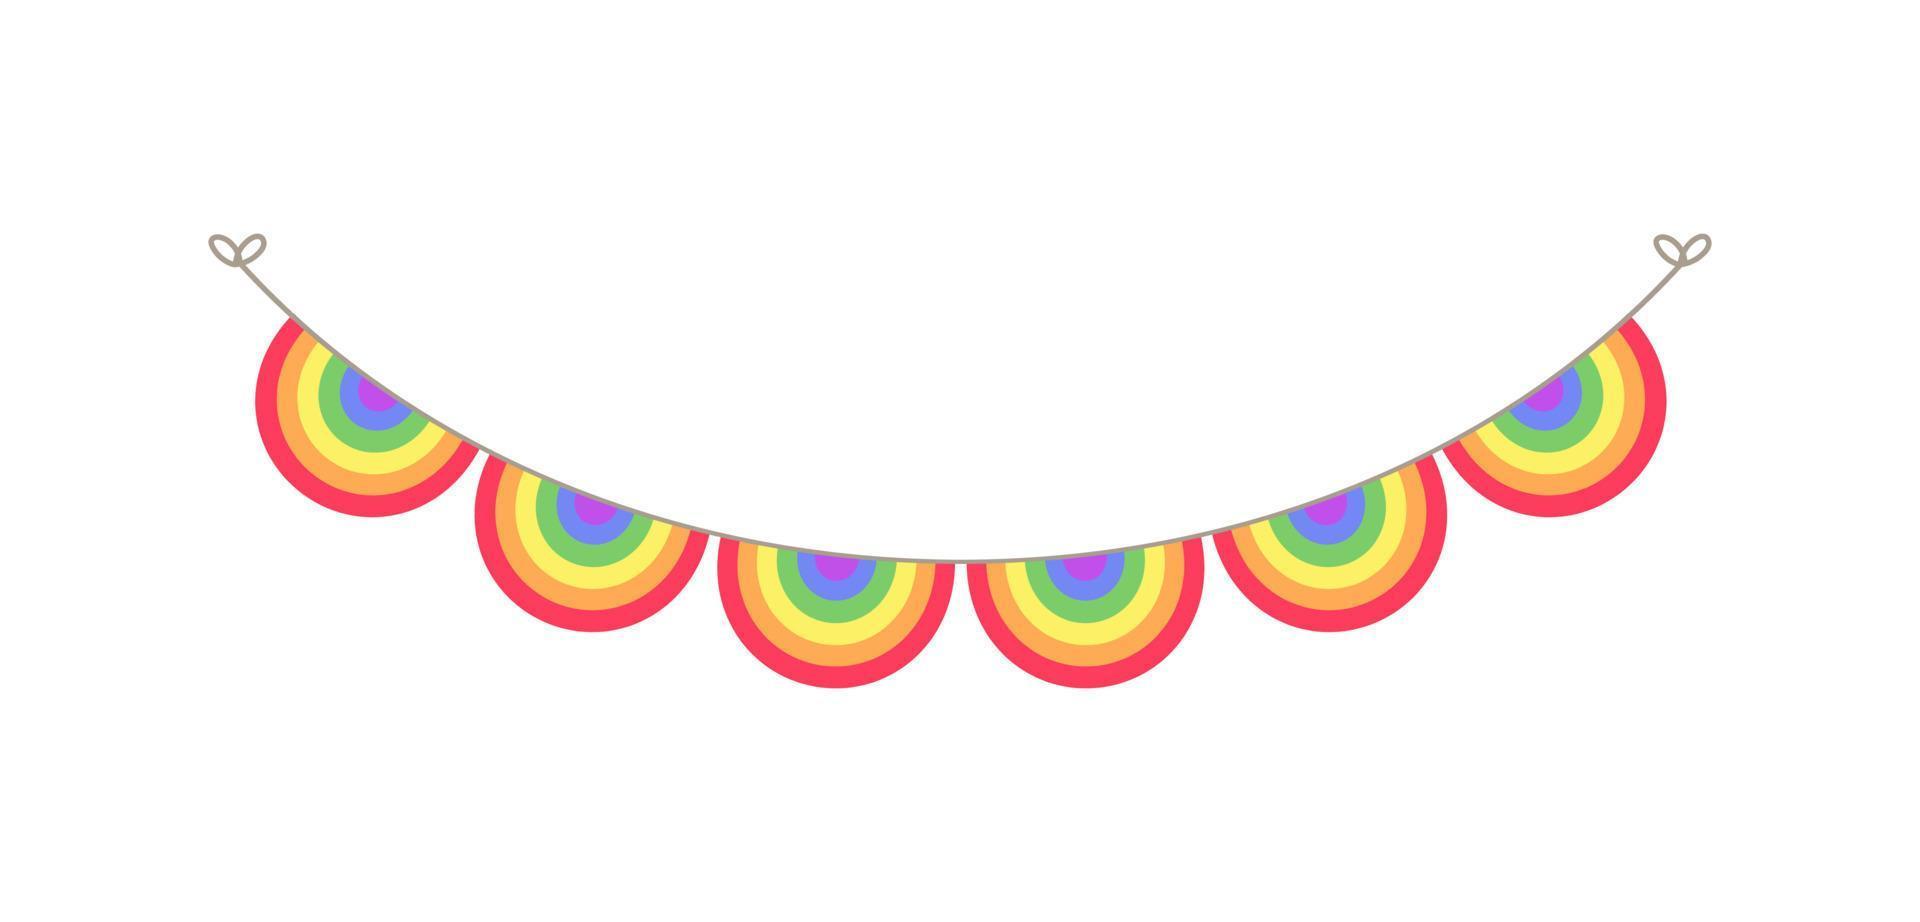 Rainbow scalloped garland bunting divider simple vector illustration clipart